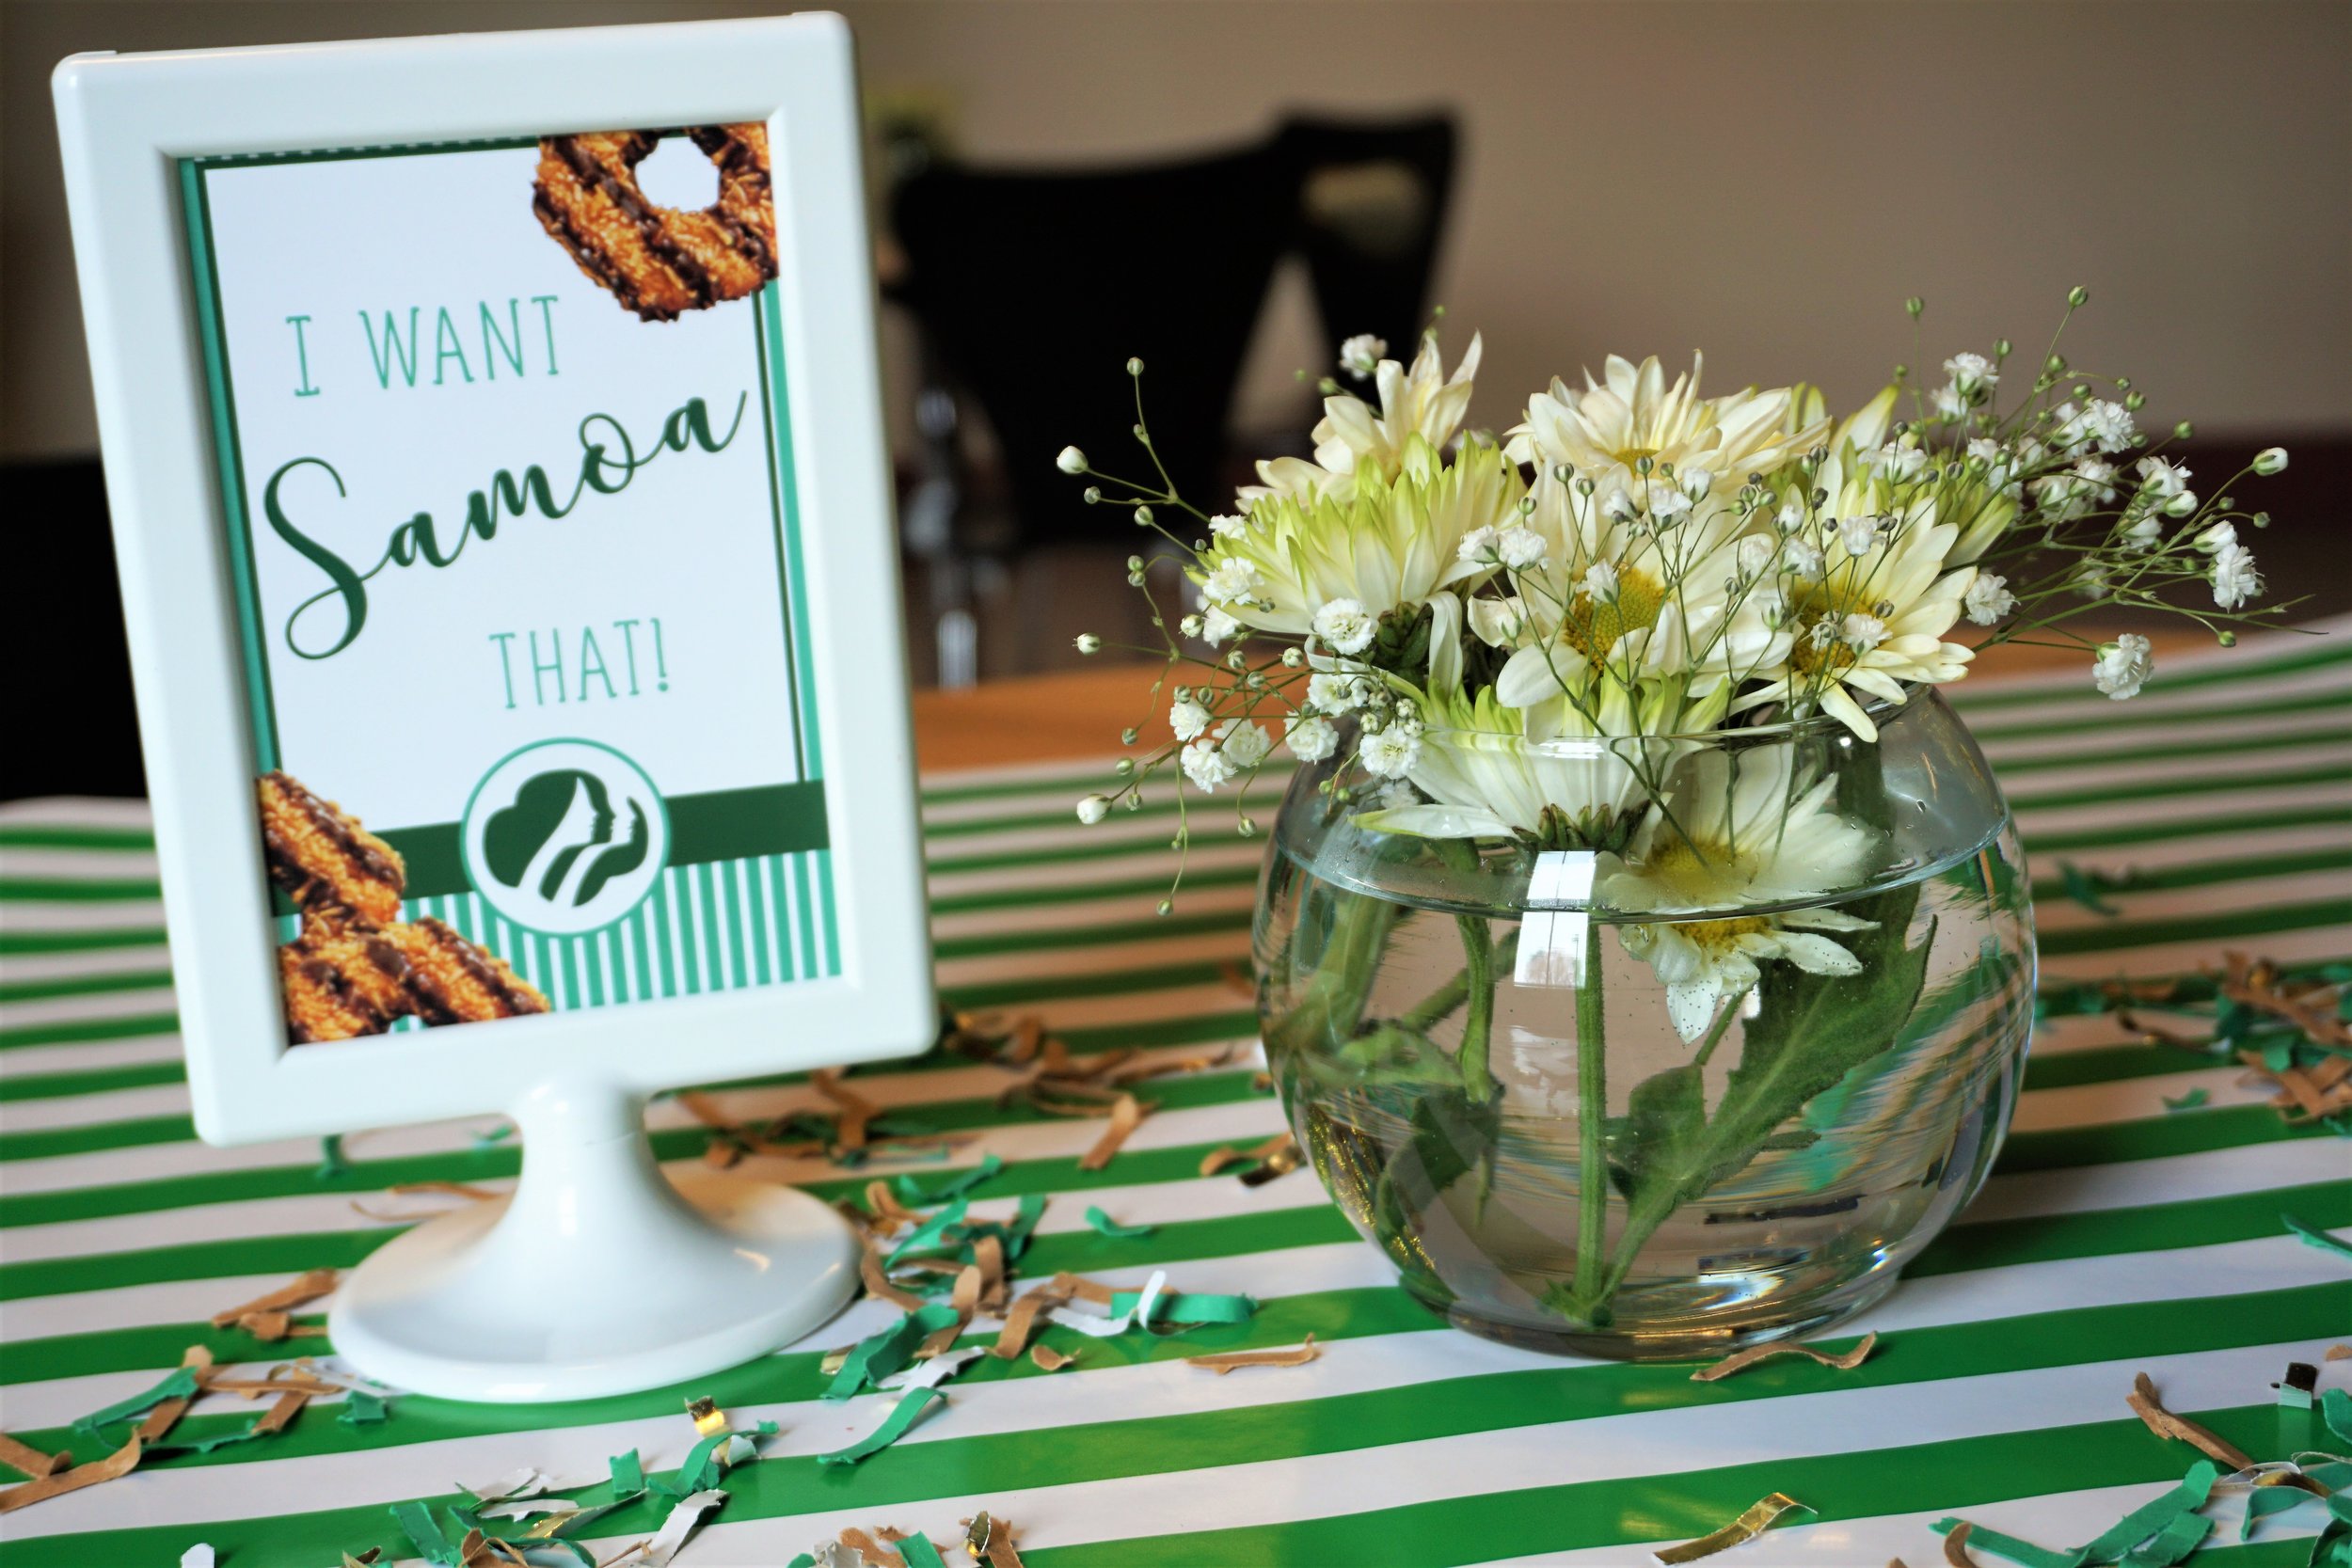  Samoa signage for a Girl Scout themed party. 